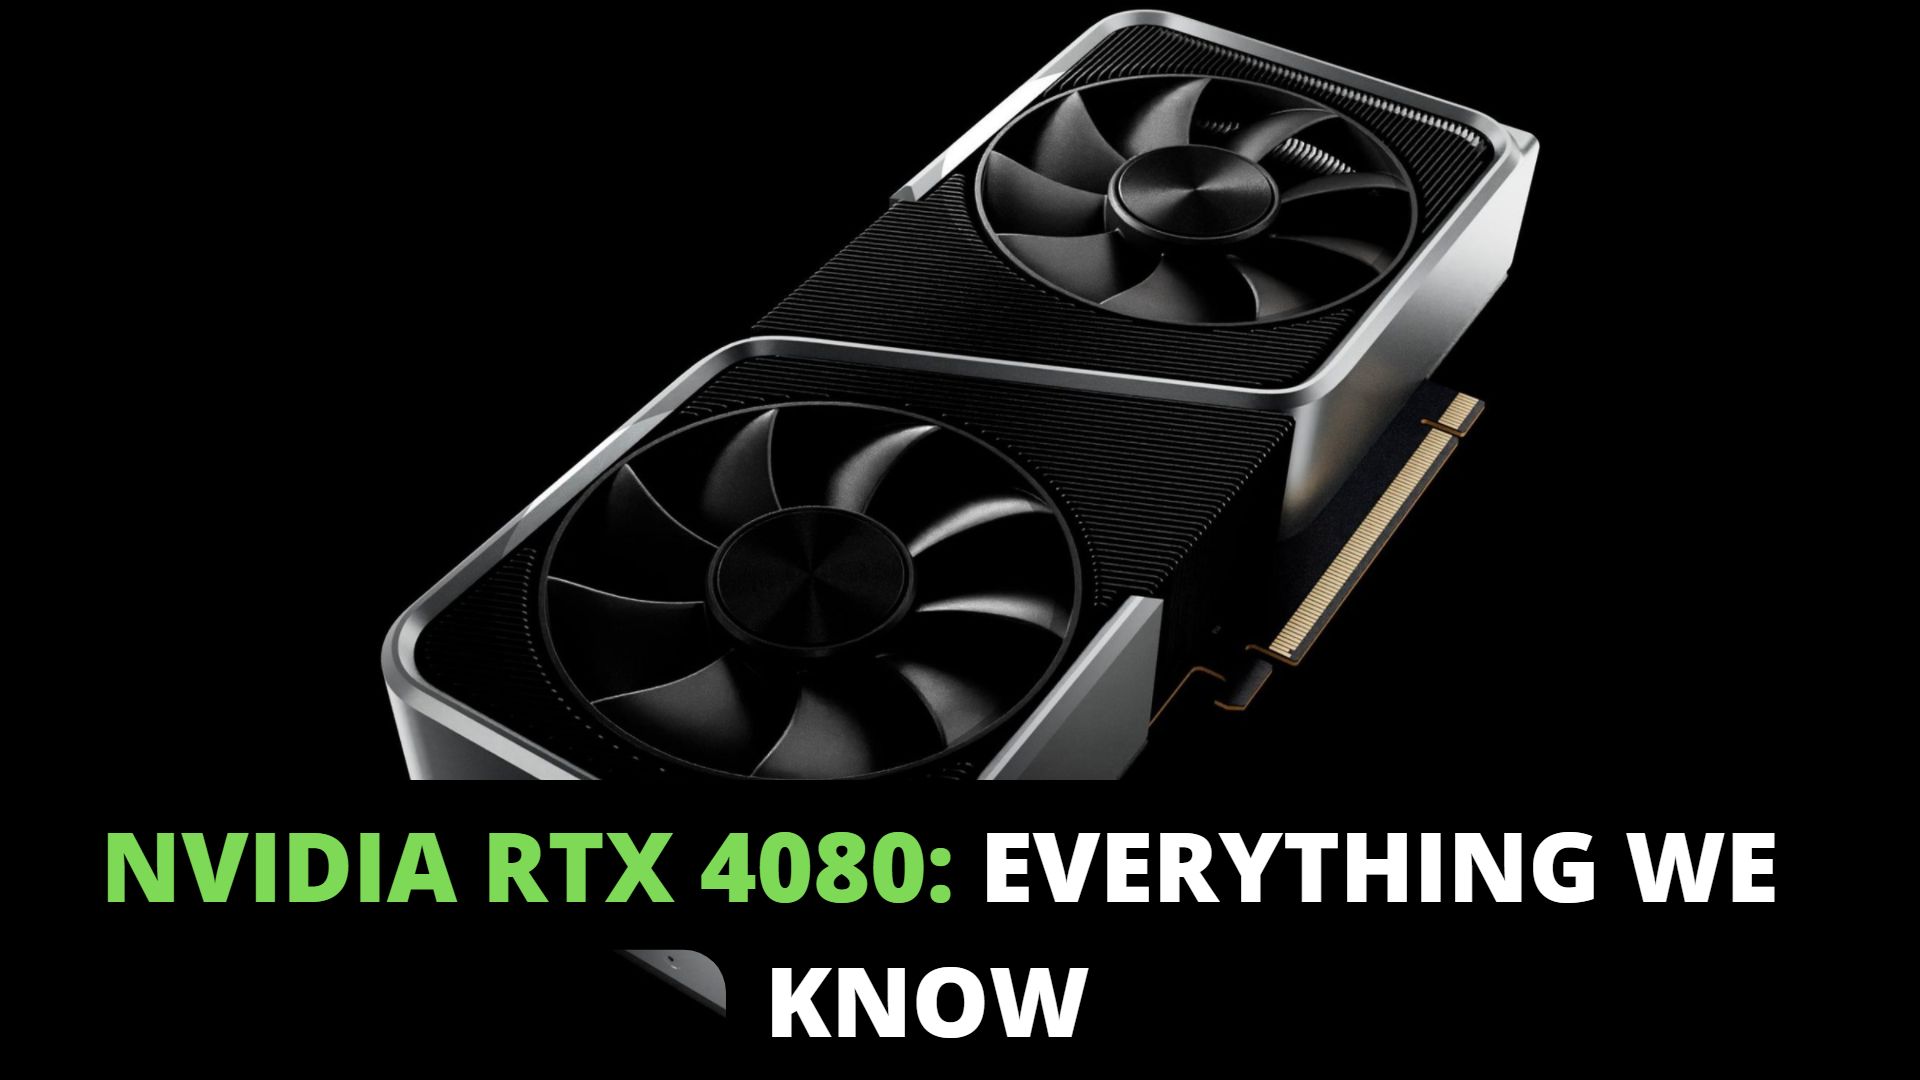 NVIDIA RTX 4080: Specs, Release Date & Price - Tech4Gamers